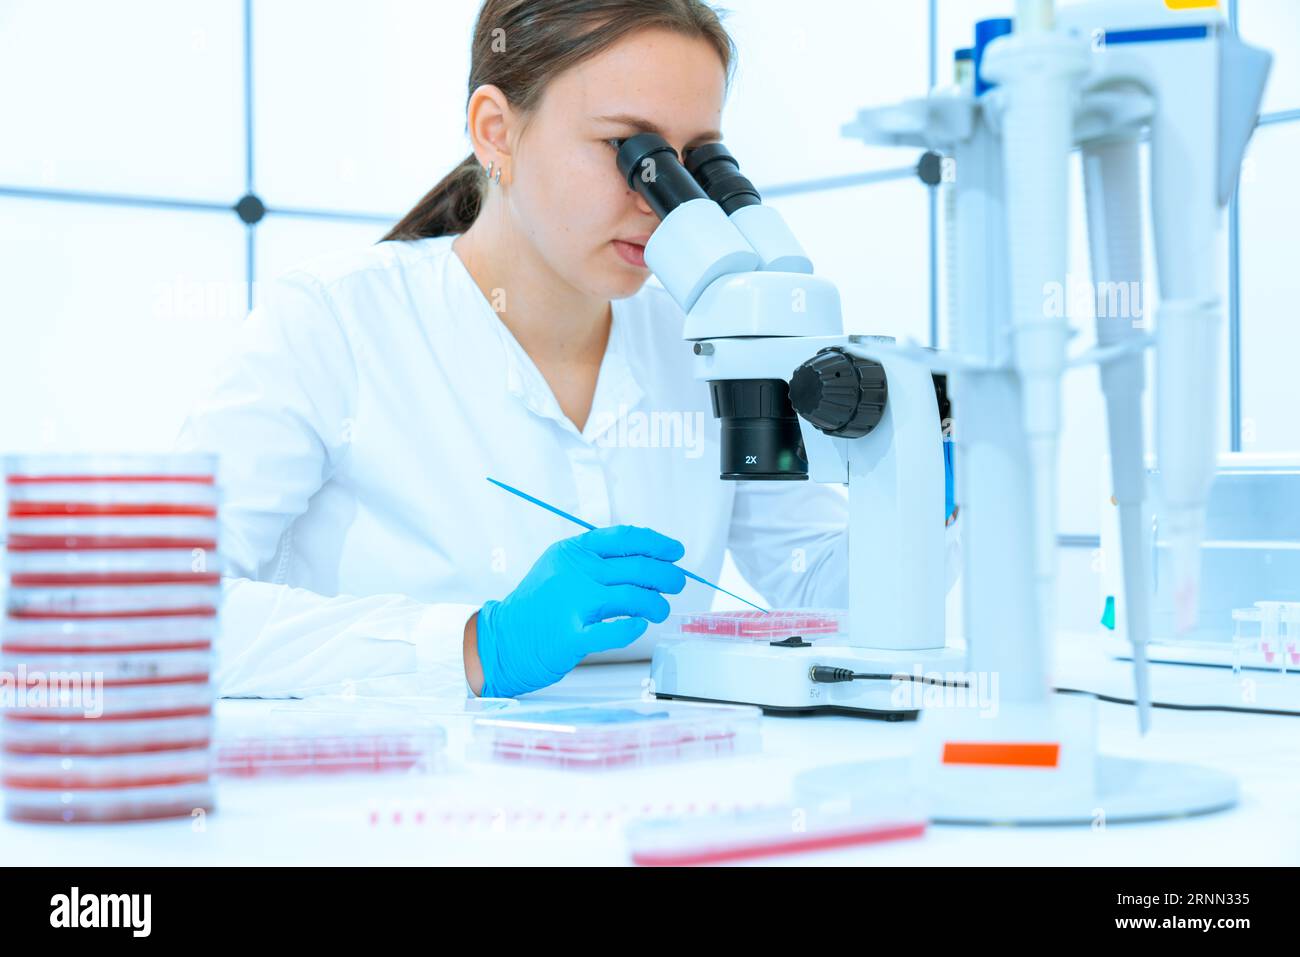 Mutation analysis: Microscopes help detect genetic mutations and study their consequences. Stock Photo